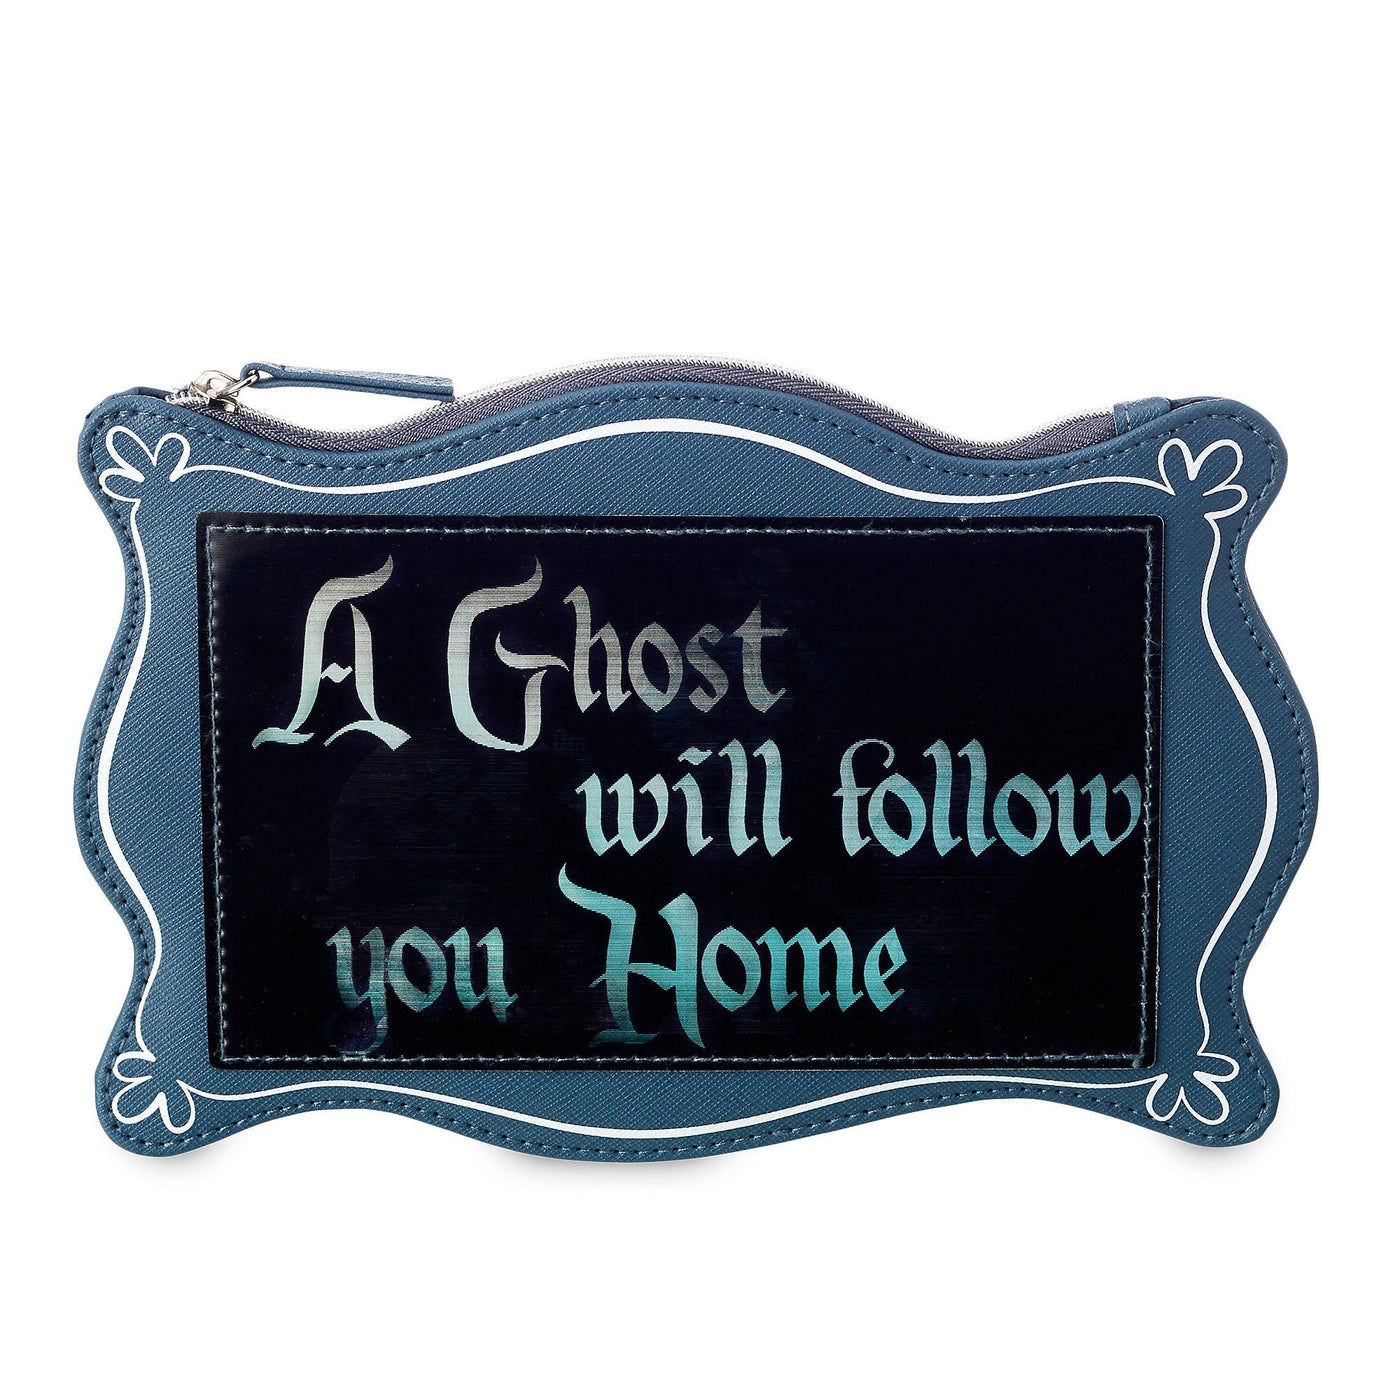 Disney Parks Hitchhiking Ghosts Haunted Mansion Pouch New with Tags